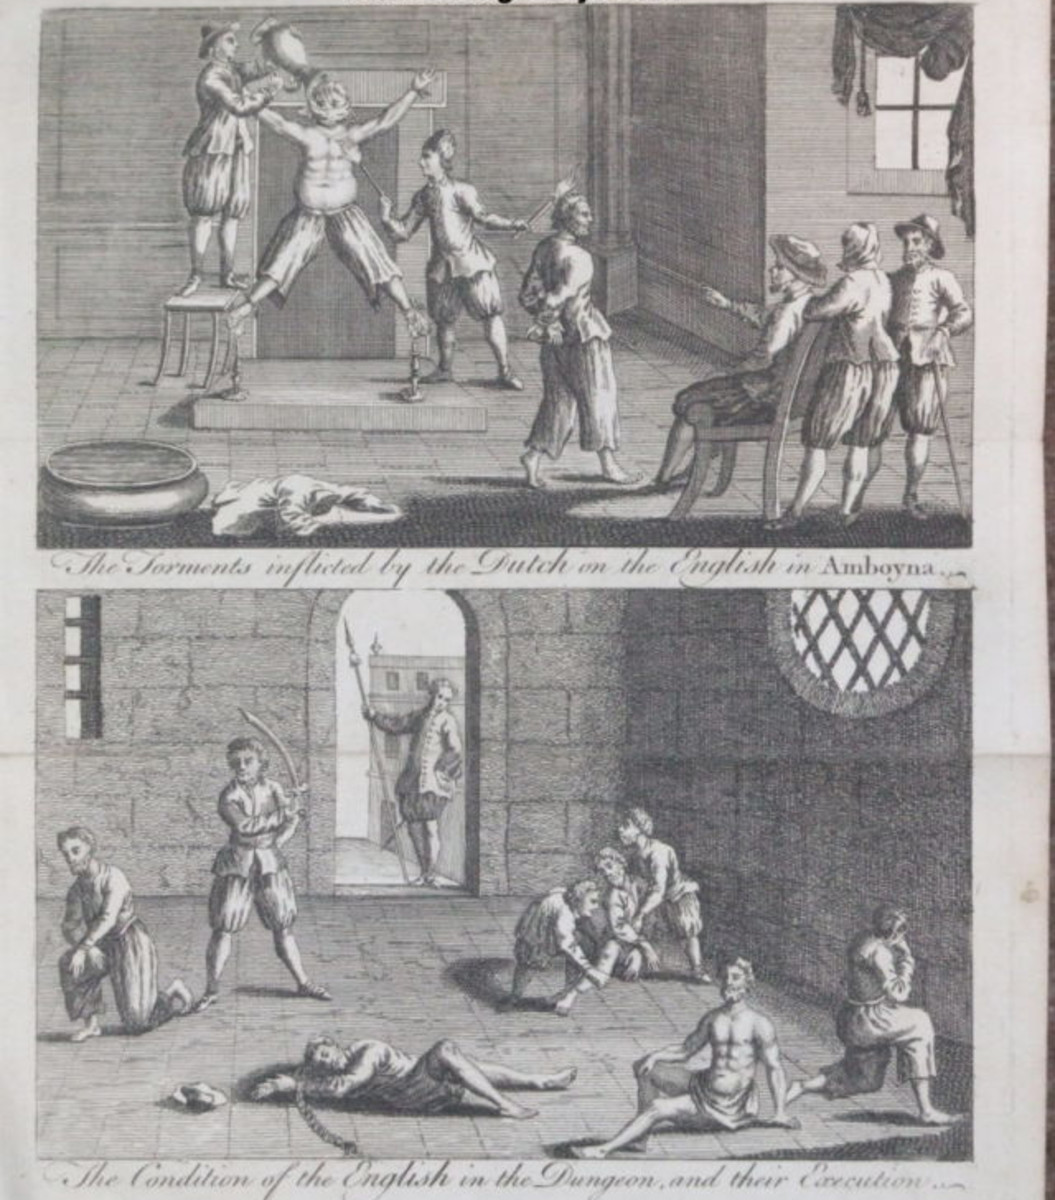 This copper engraving from approximately 1700 depicts the condition of the English prisoners at the hands of the Dutch. In the 1660s, the conflict and competition for the spice trade came to a head, with the Dutch murdering a number of merchants who were also in the Spice Islands trying to profit from the trade.